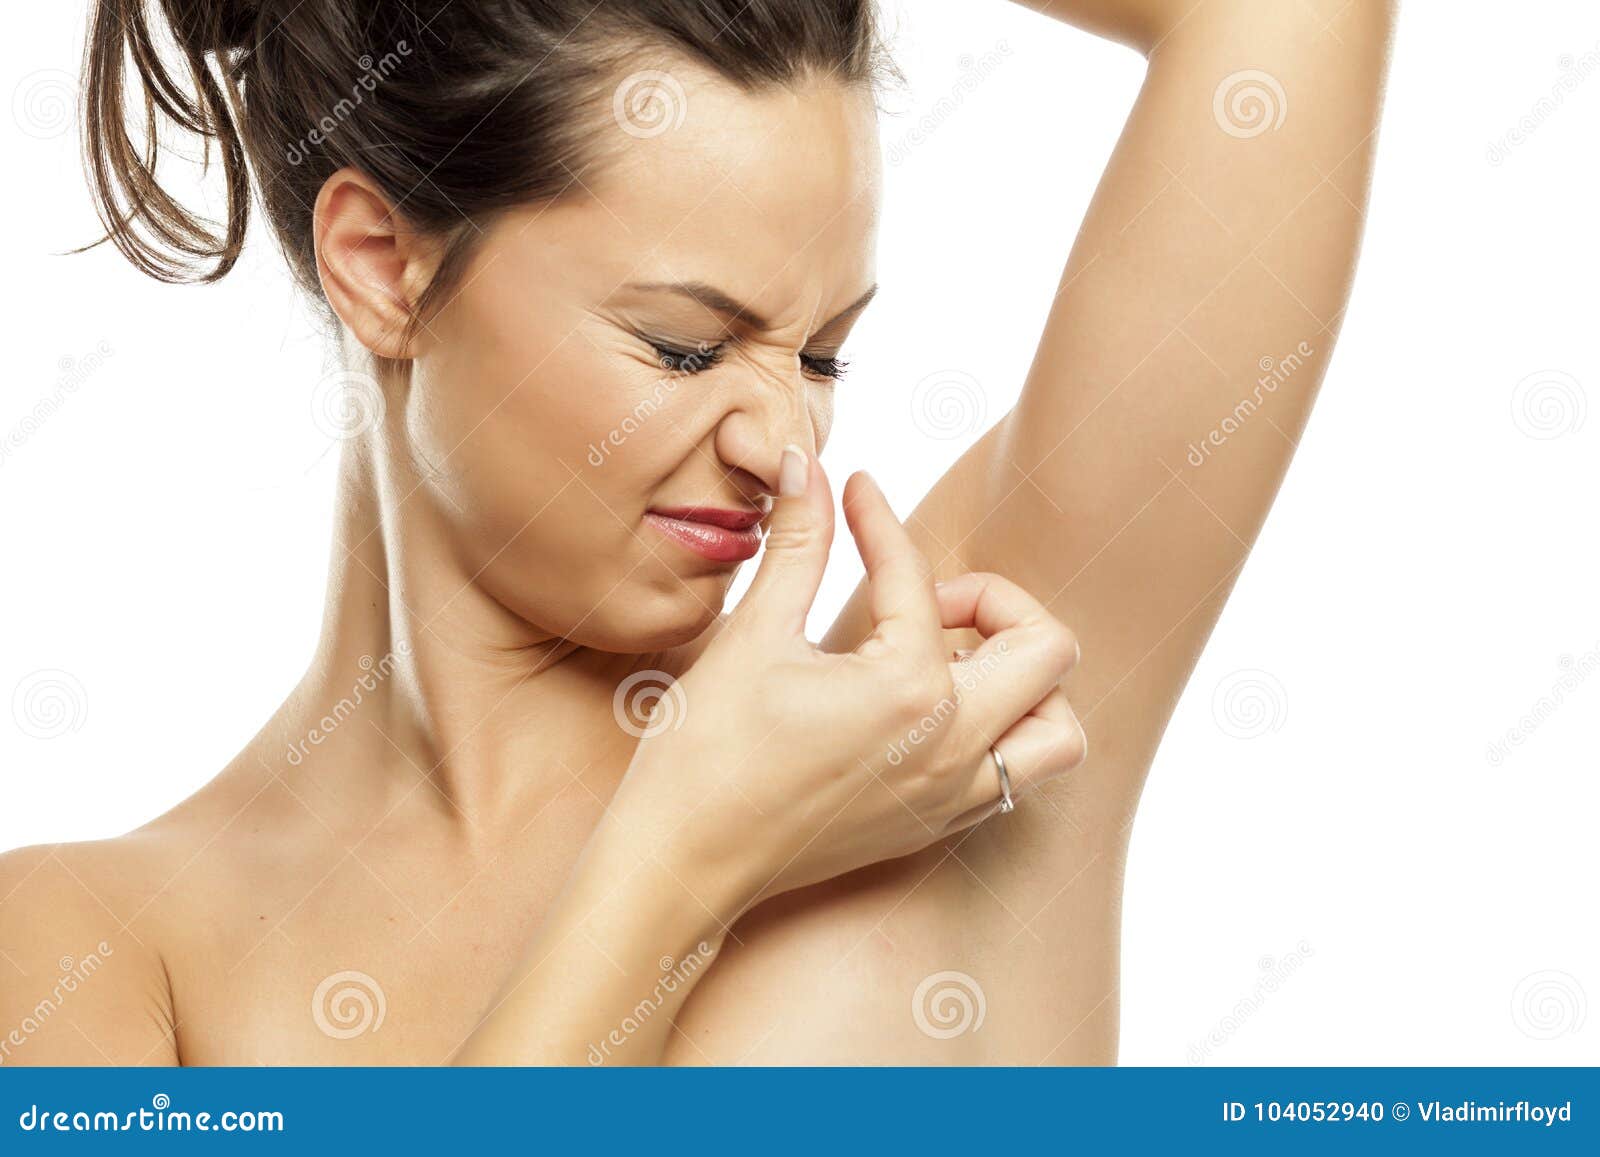 perspiration - smelly armpits